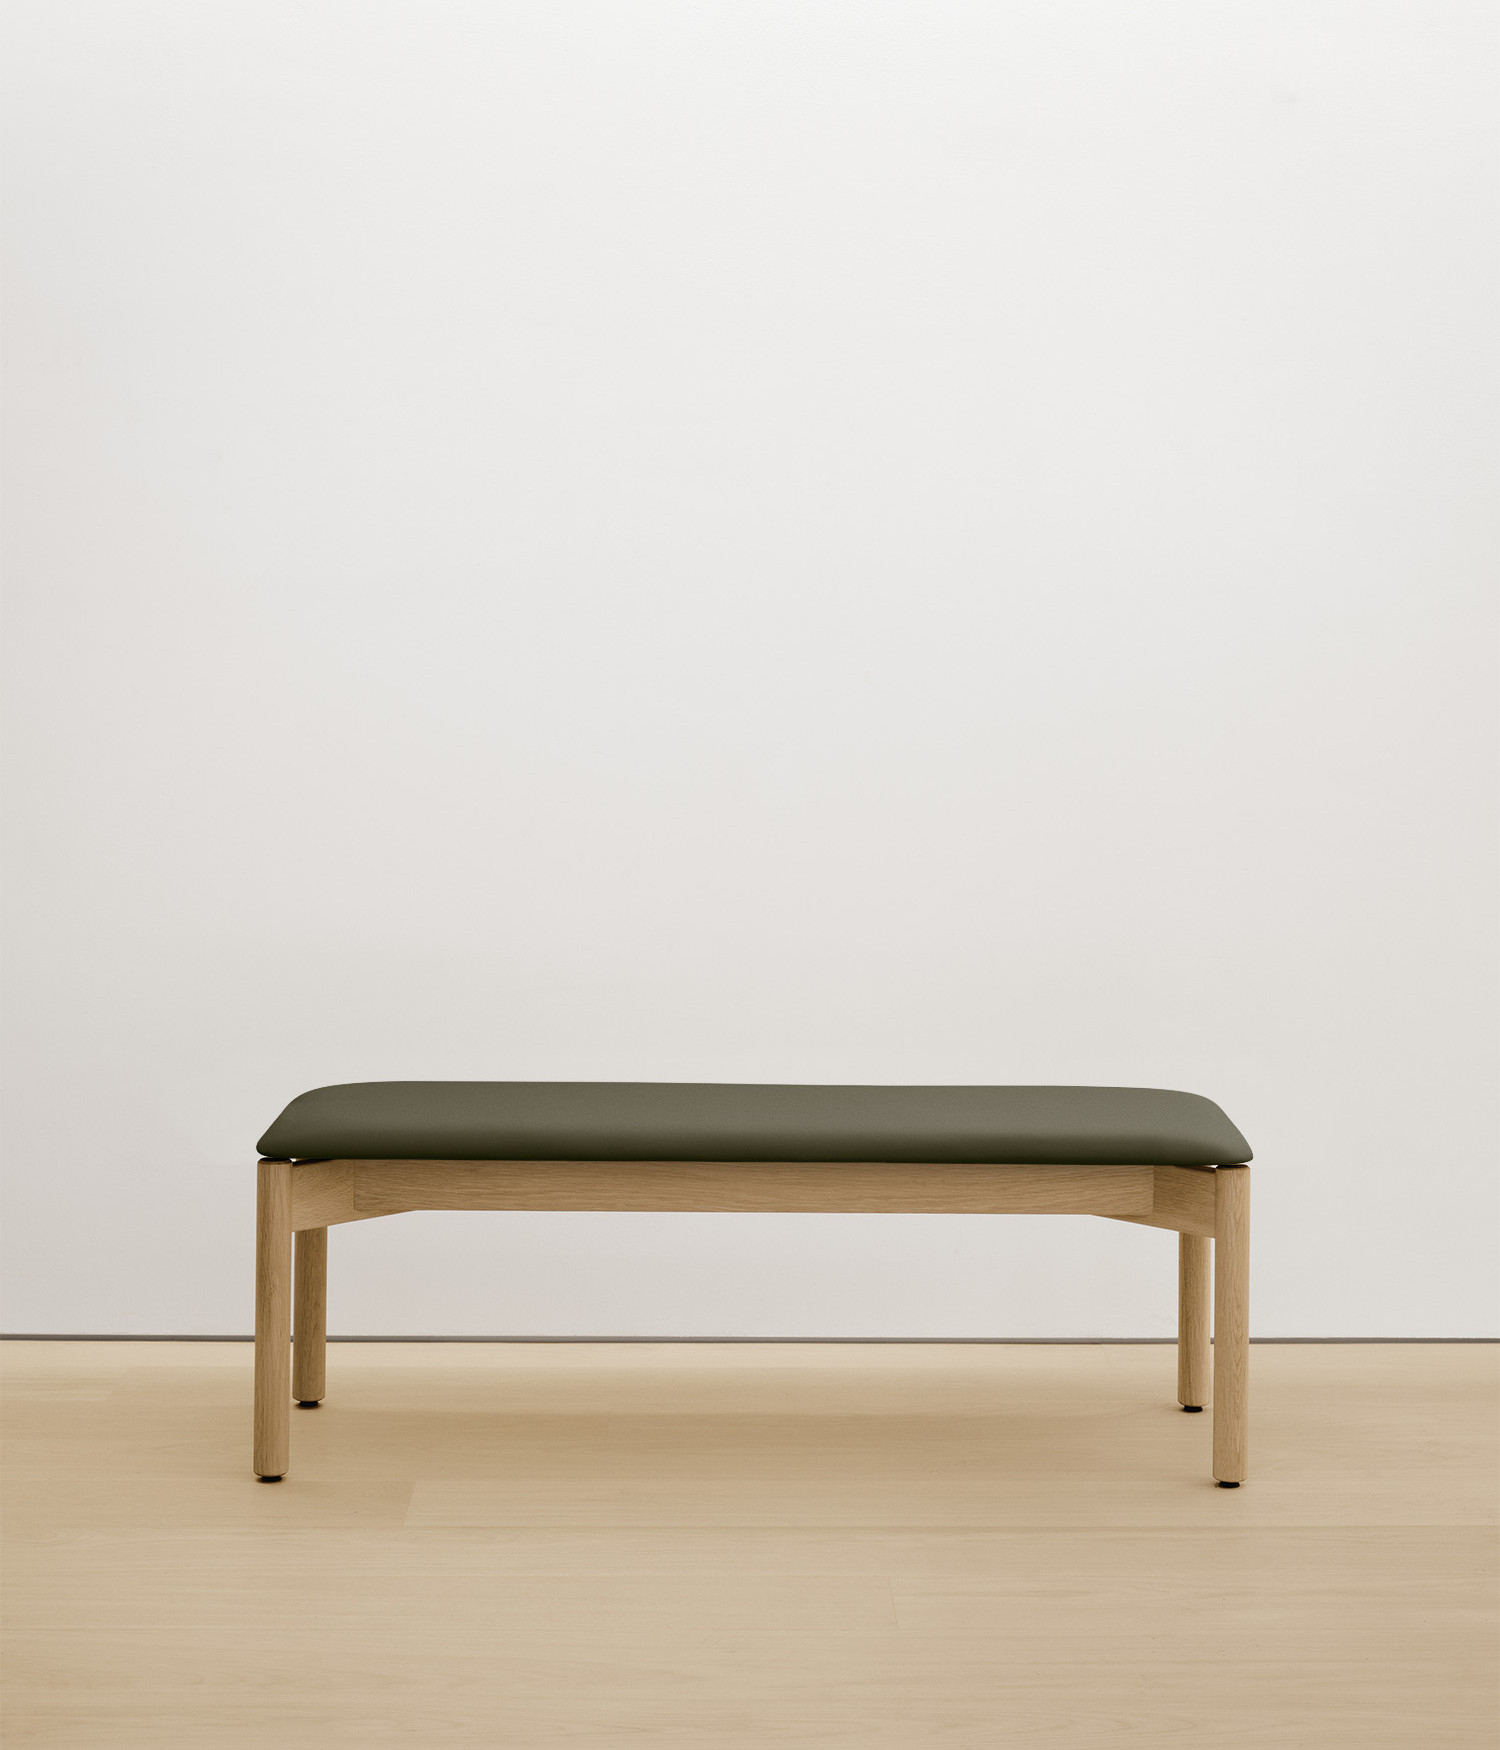  white-oak bench with forest color upholstered seat